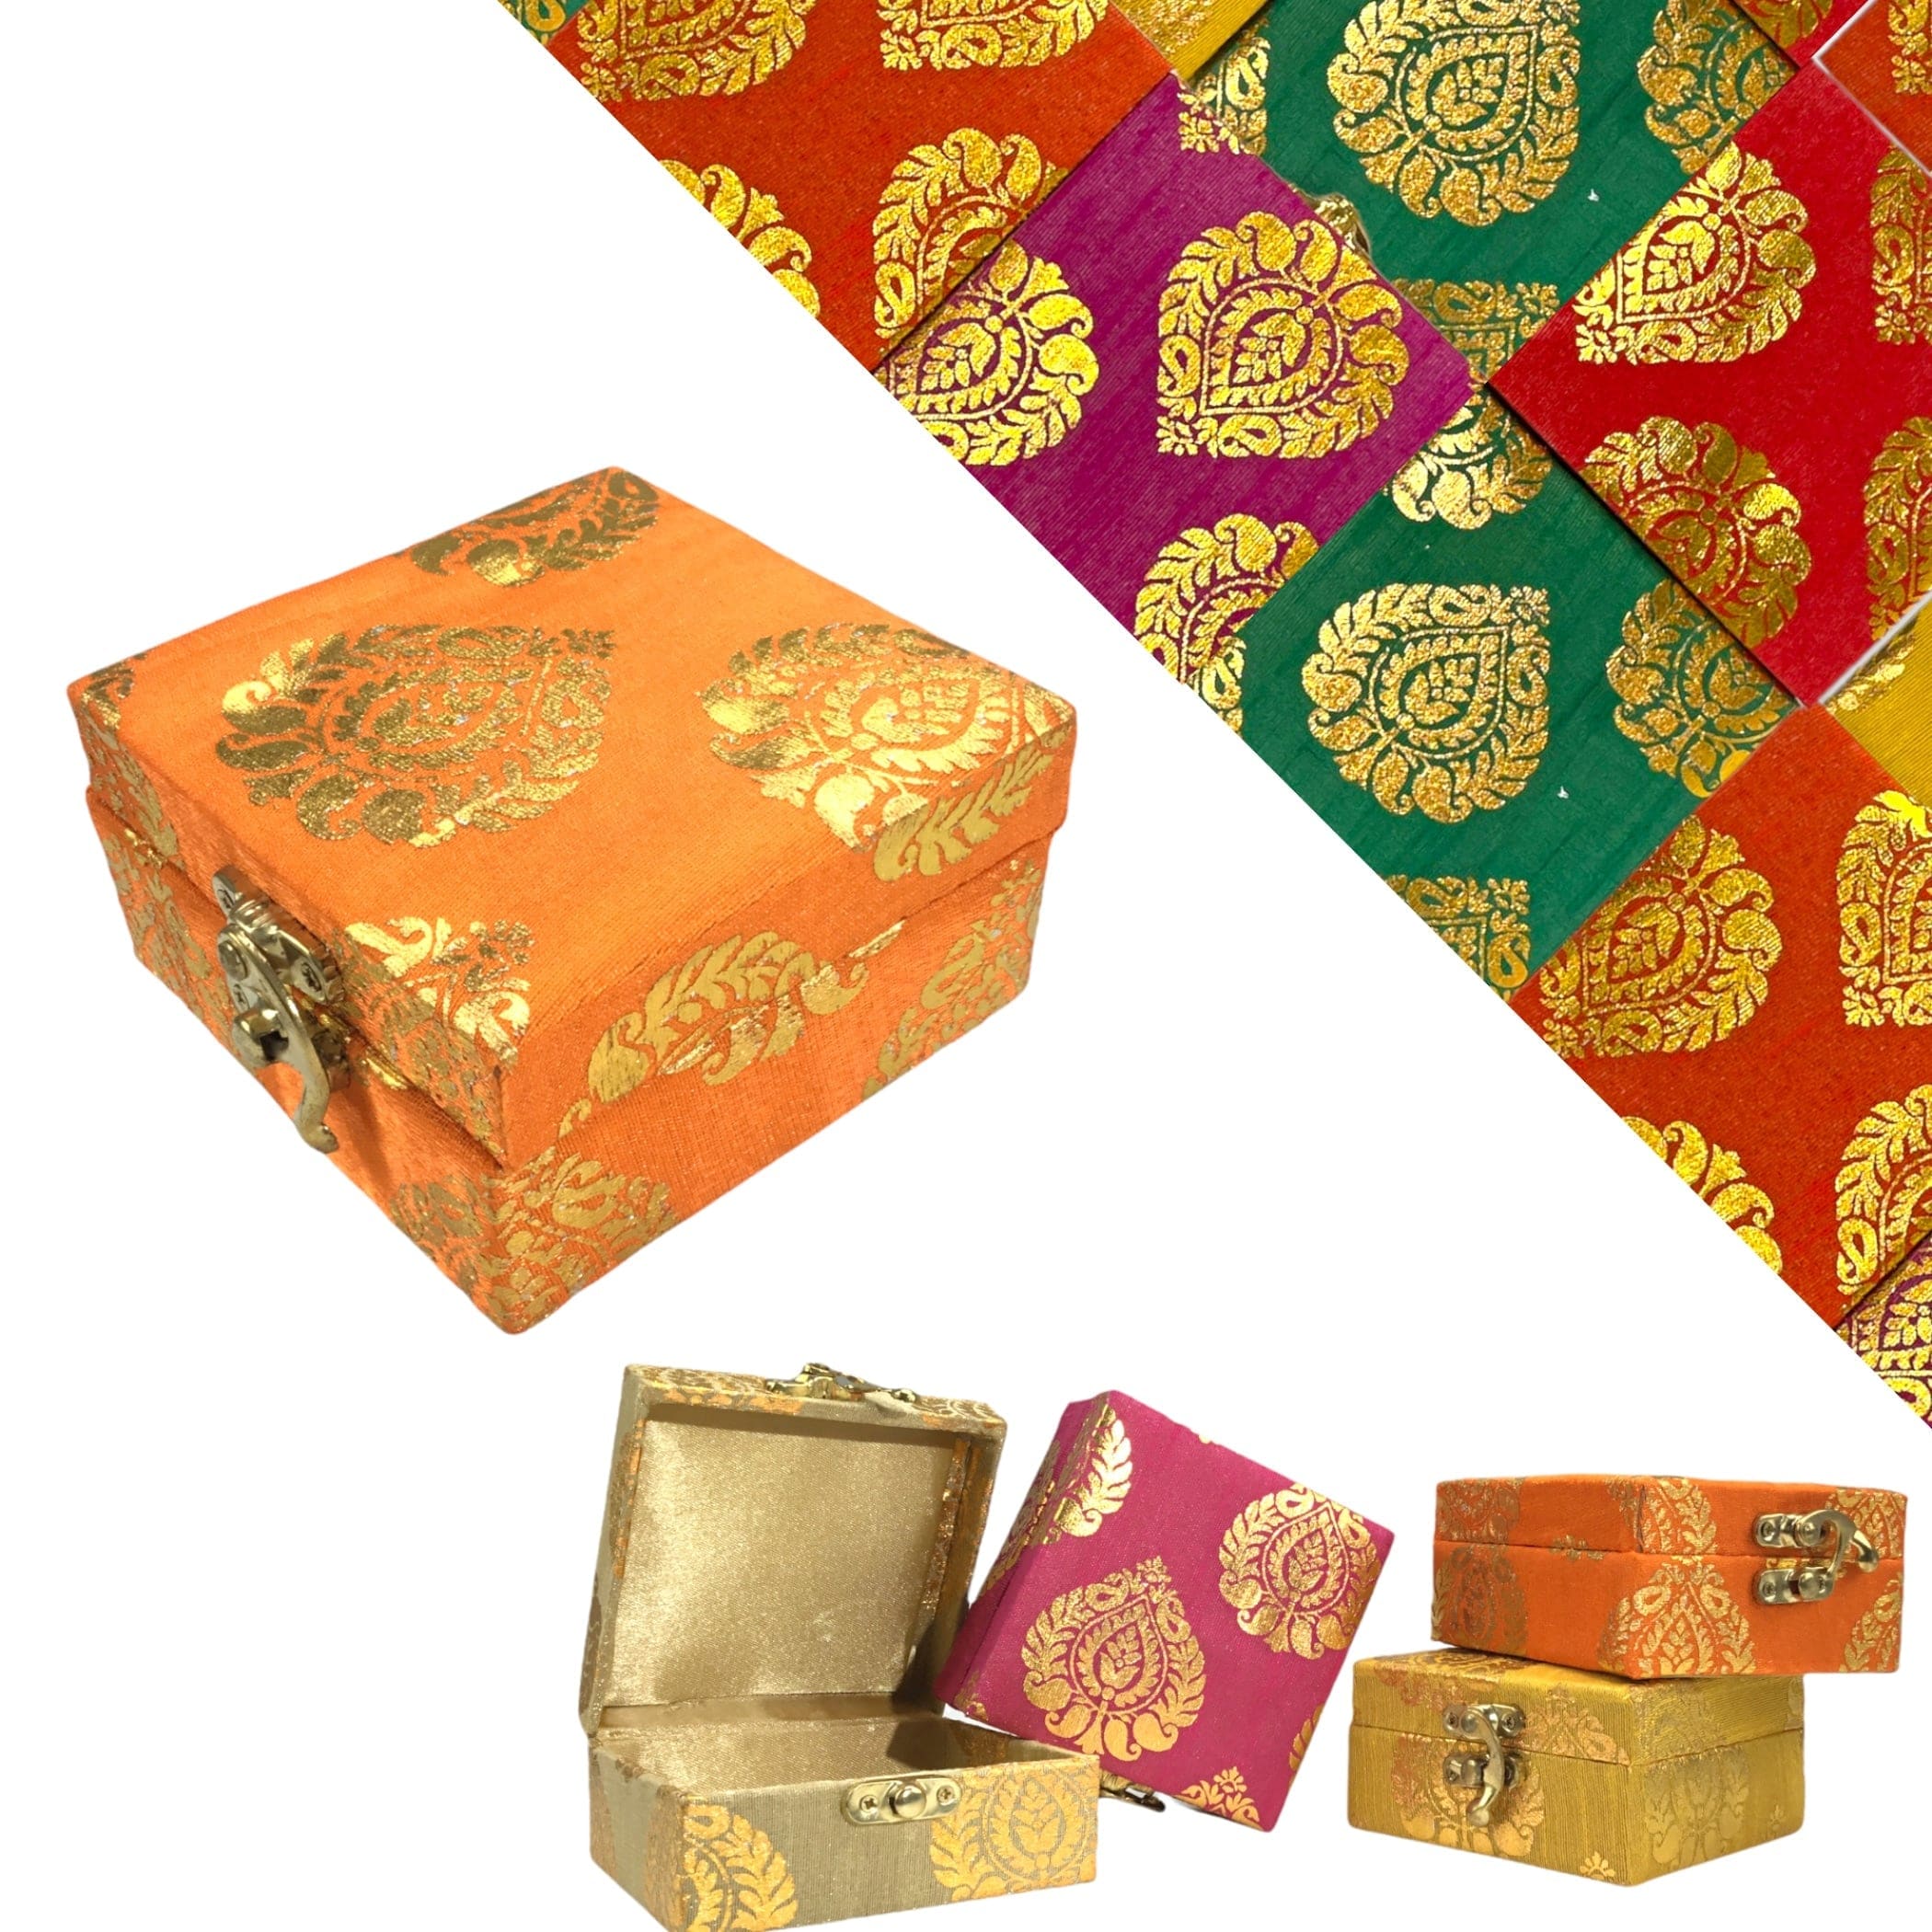 Small Handmade Jewelry Box Brocade Gift Boxes Favor